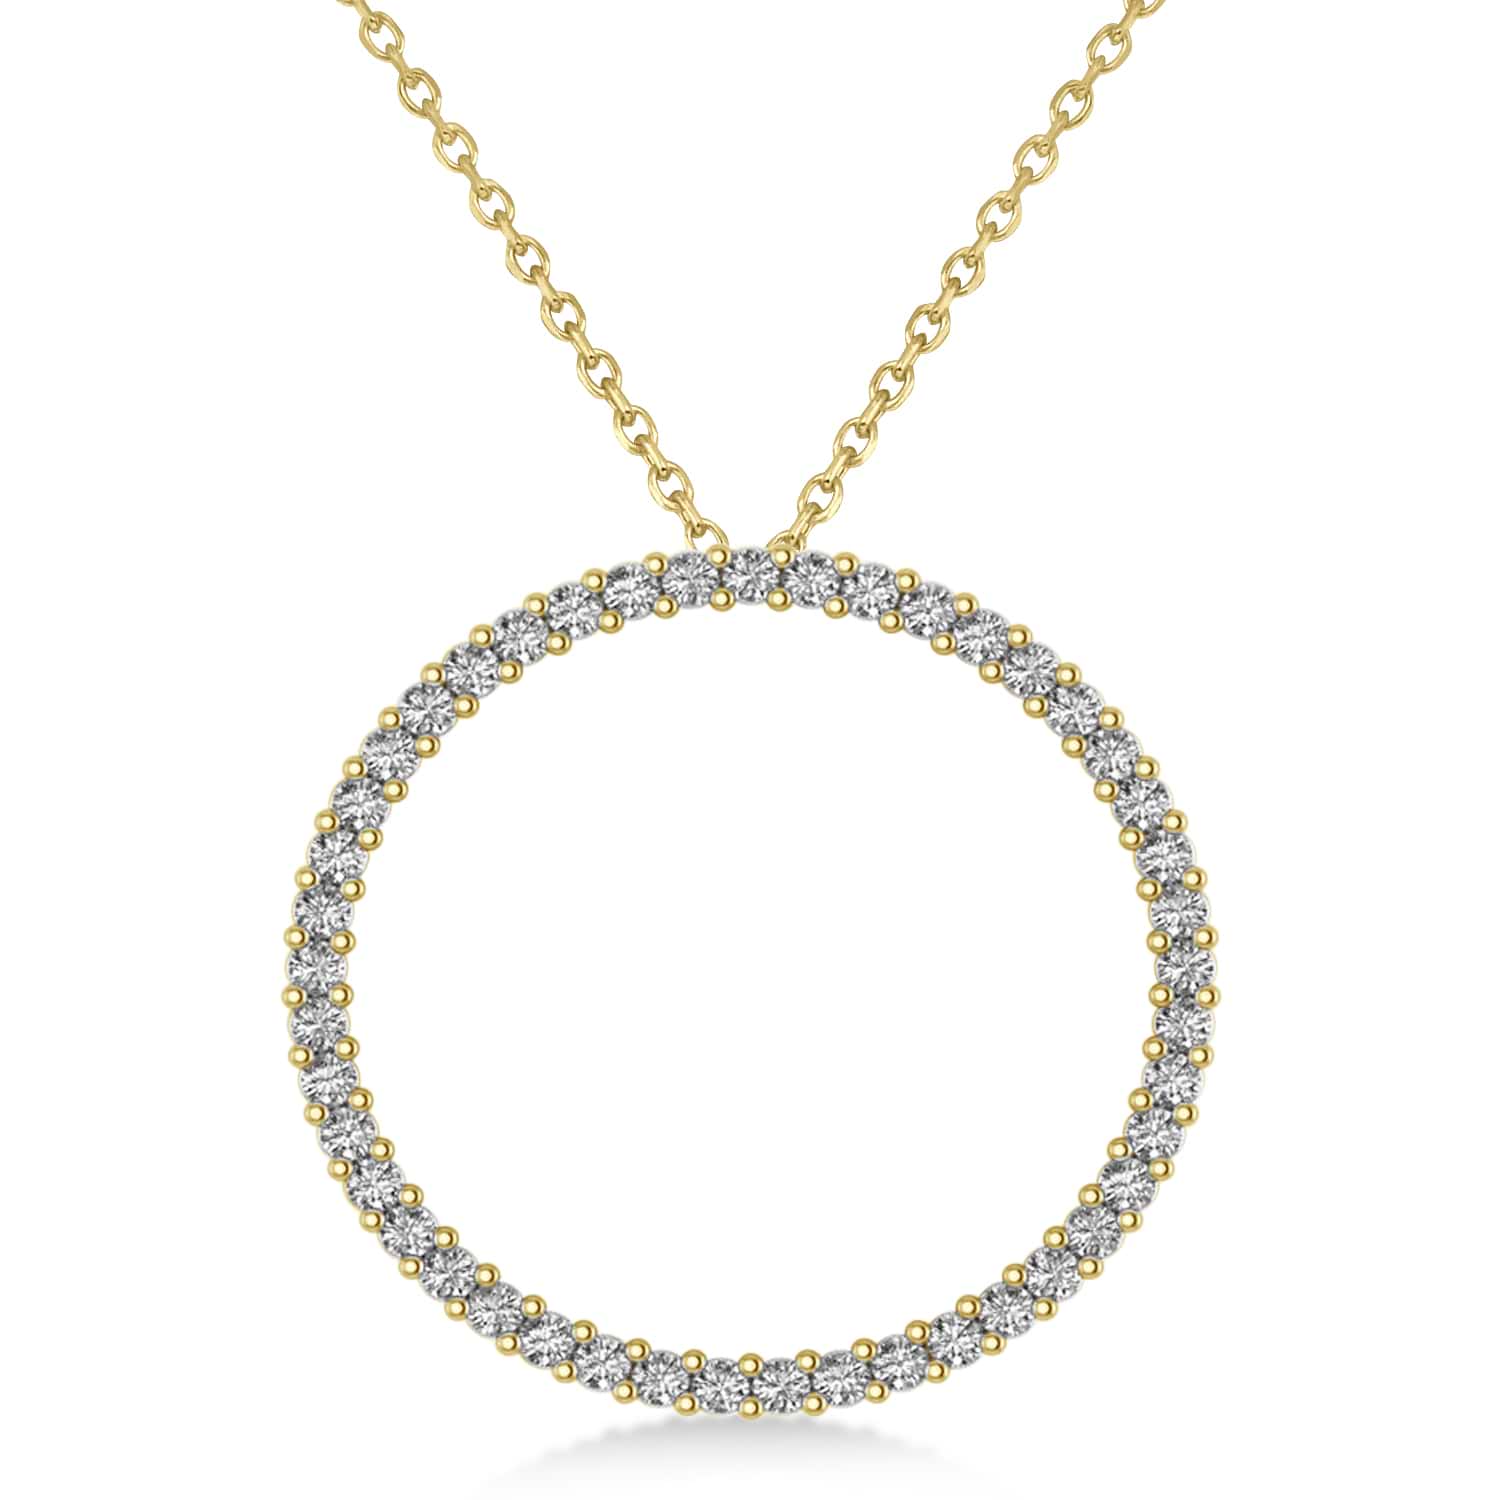 Moissanite Circle of Life Charm Pendant Necklace 14k Yellow Gold (0.68ct)